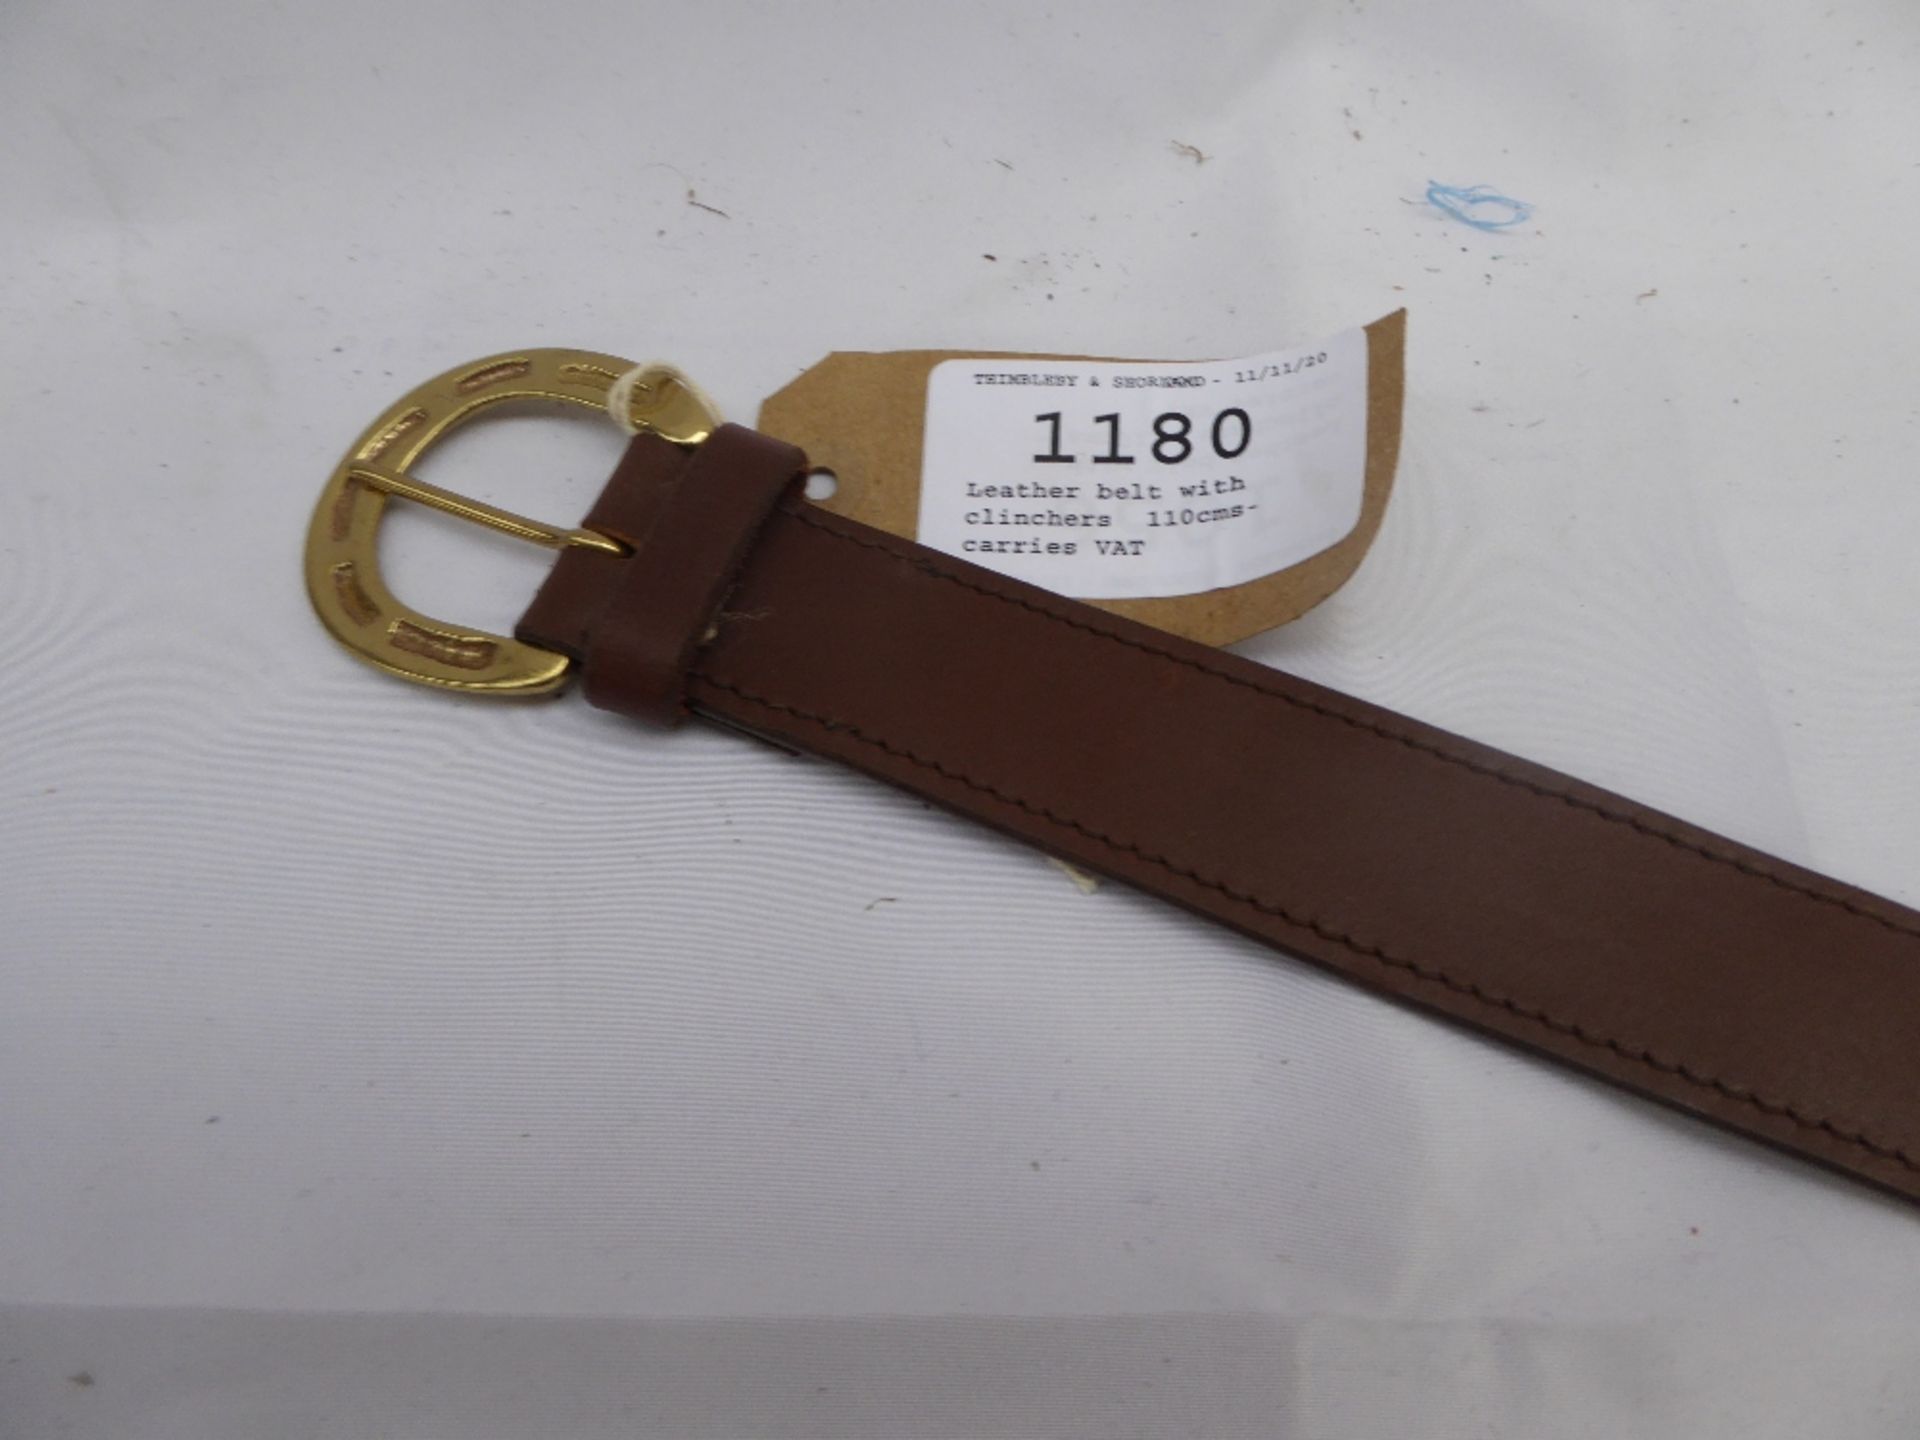 Leather belt with clinchers, 110cms- carries VAT